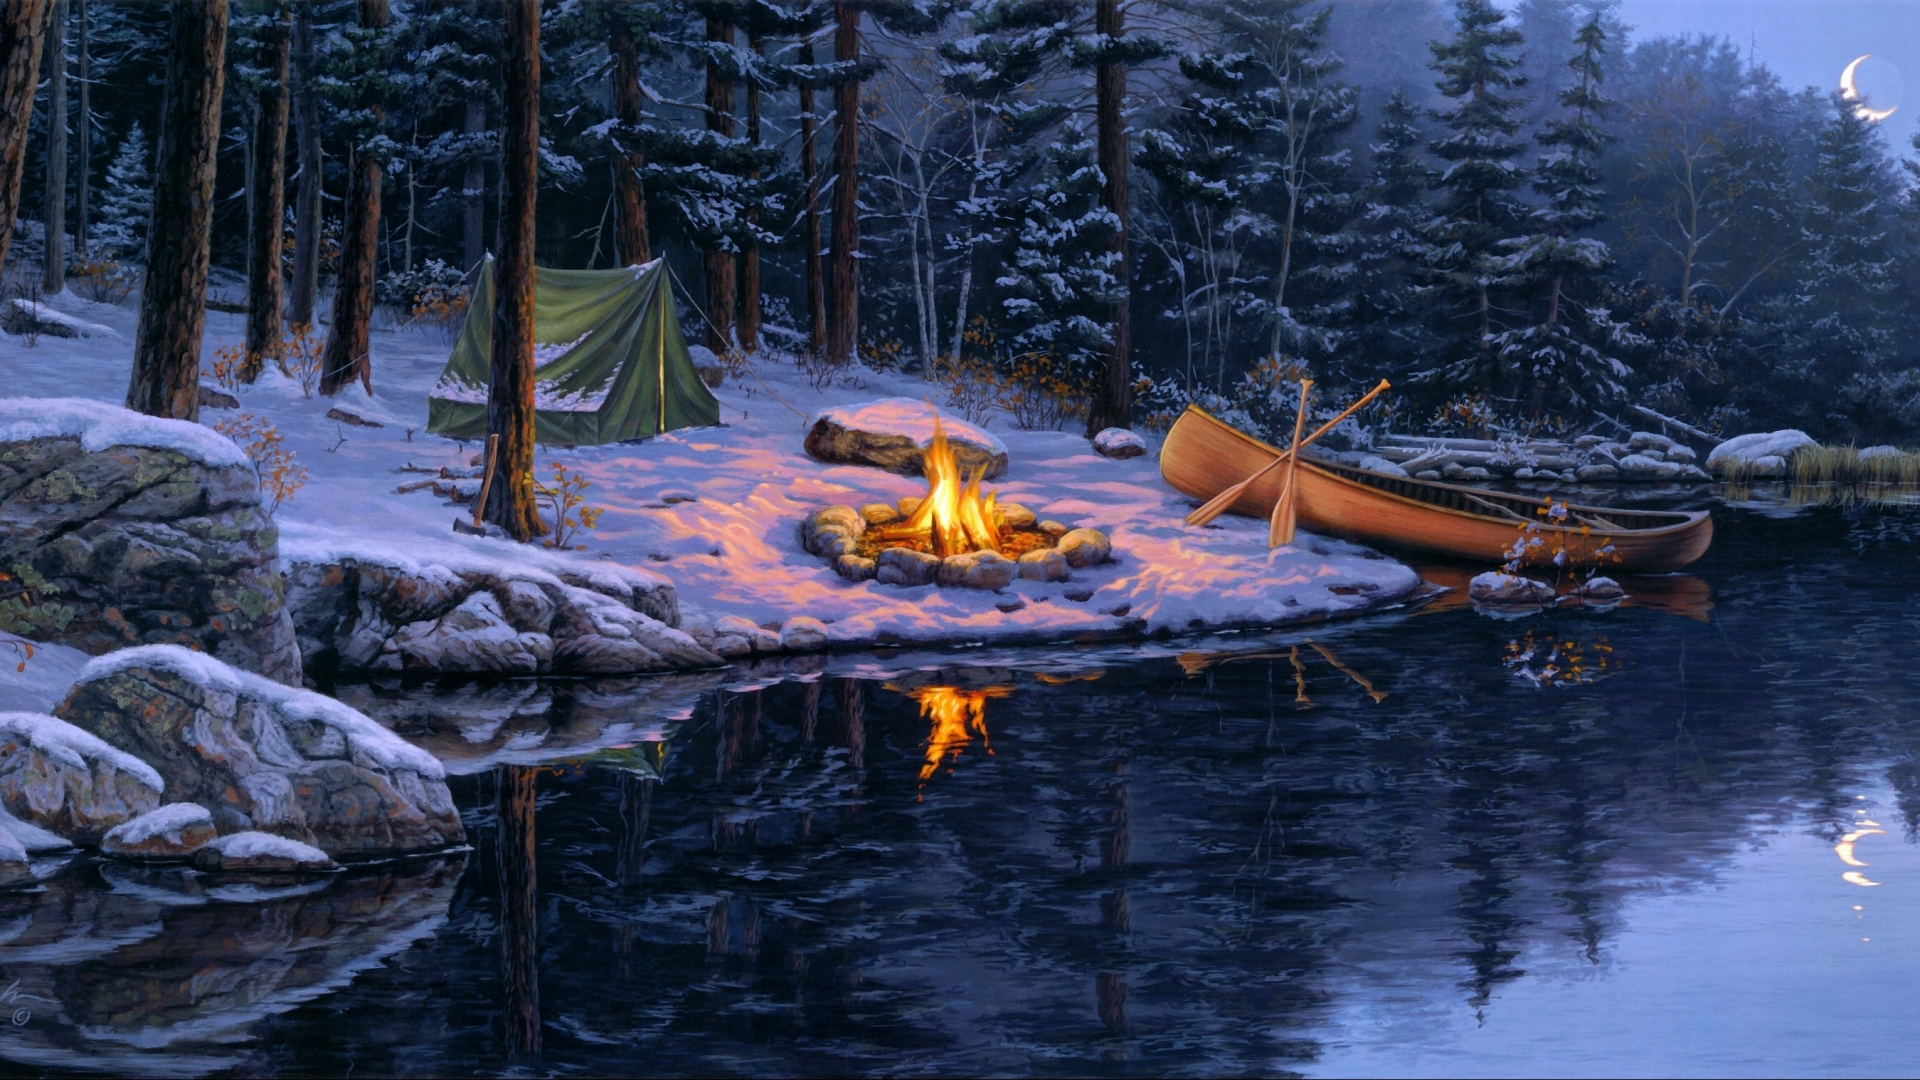 Winter Campfire Painting [1920x1080]